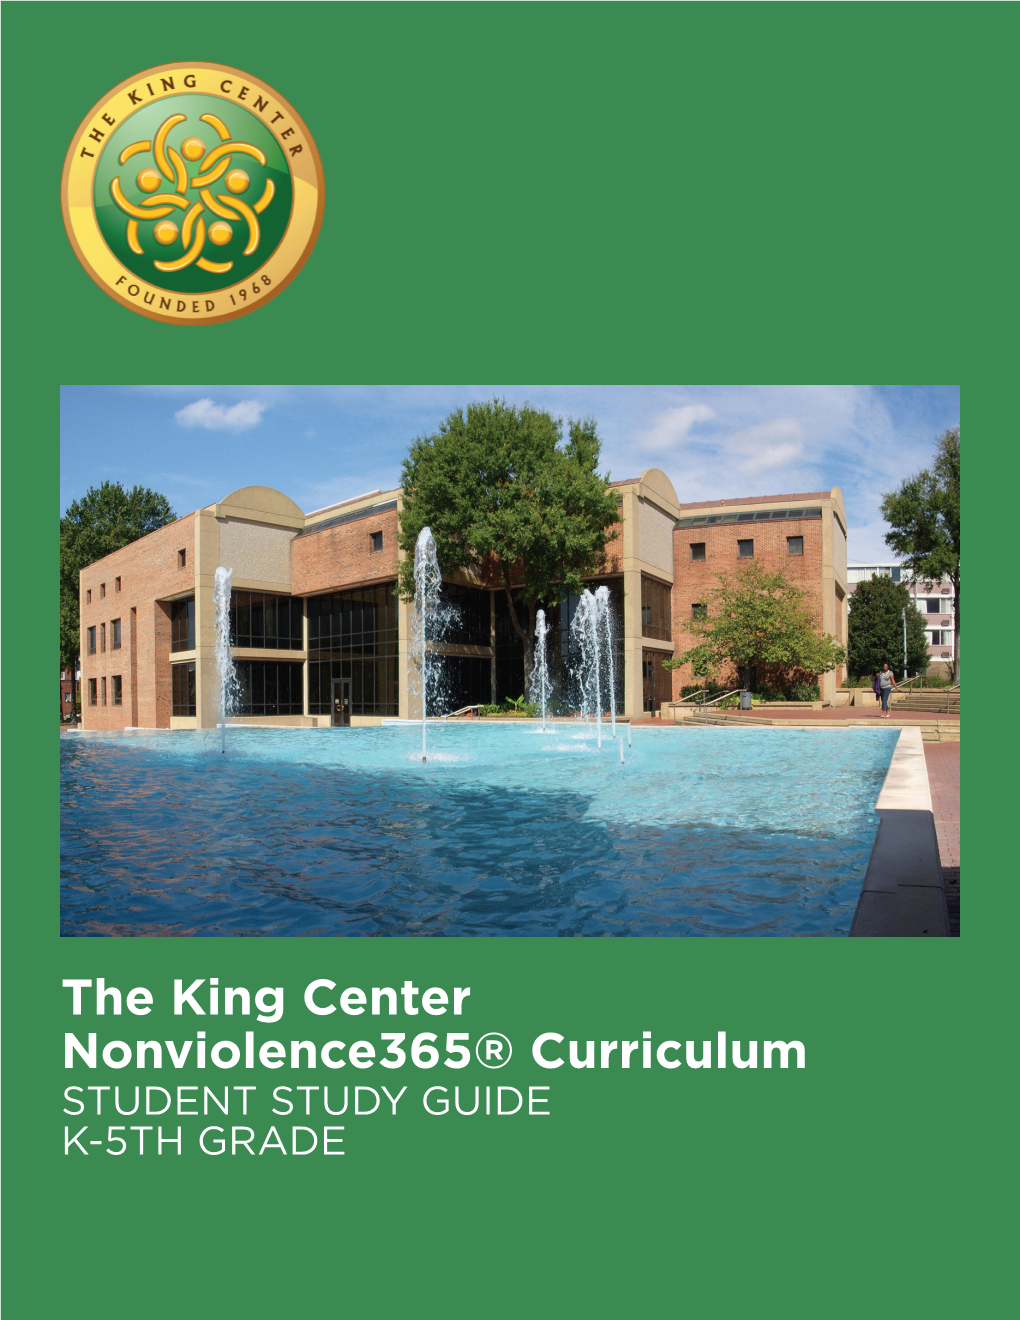 The King Center Nonviolence365® Curriculum STUDENT STUDY GUIDE K-5TH GRADE 1 Module One - Martin Luther King, Jr